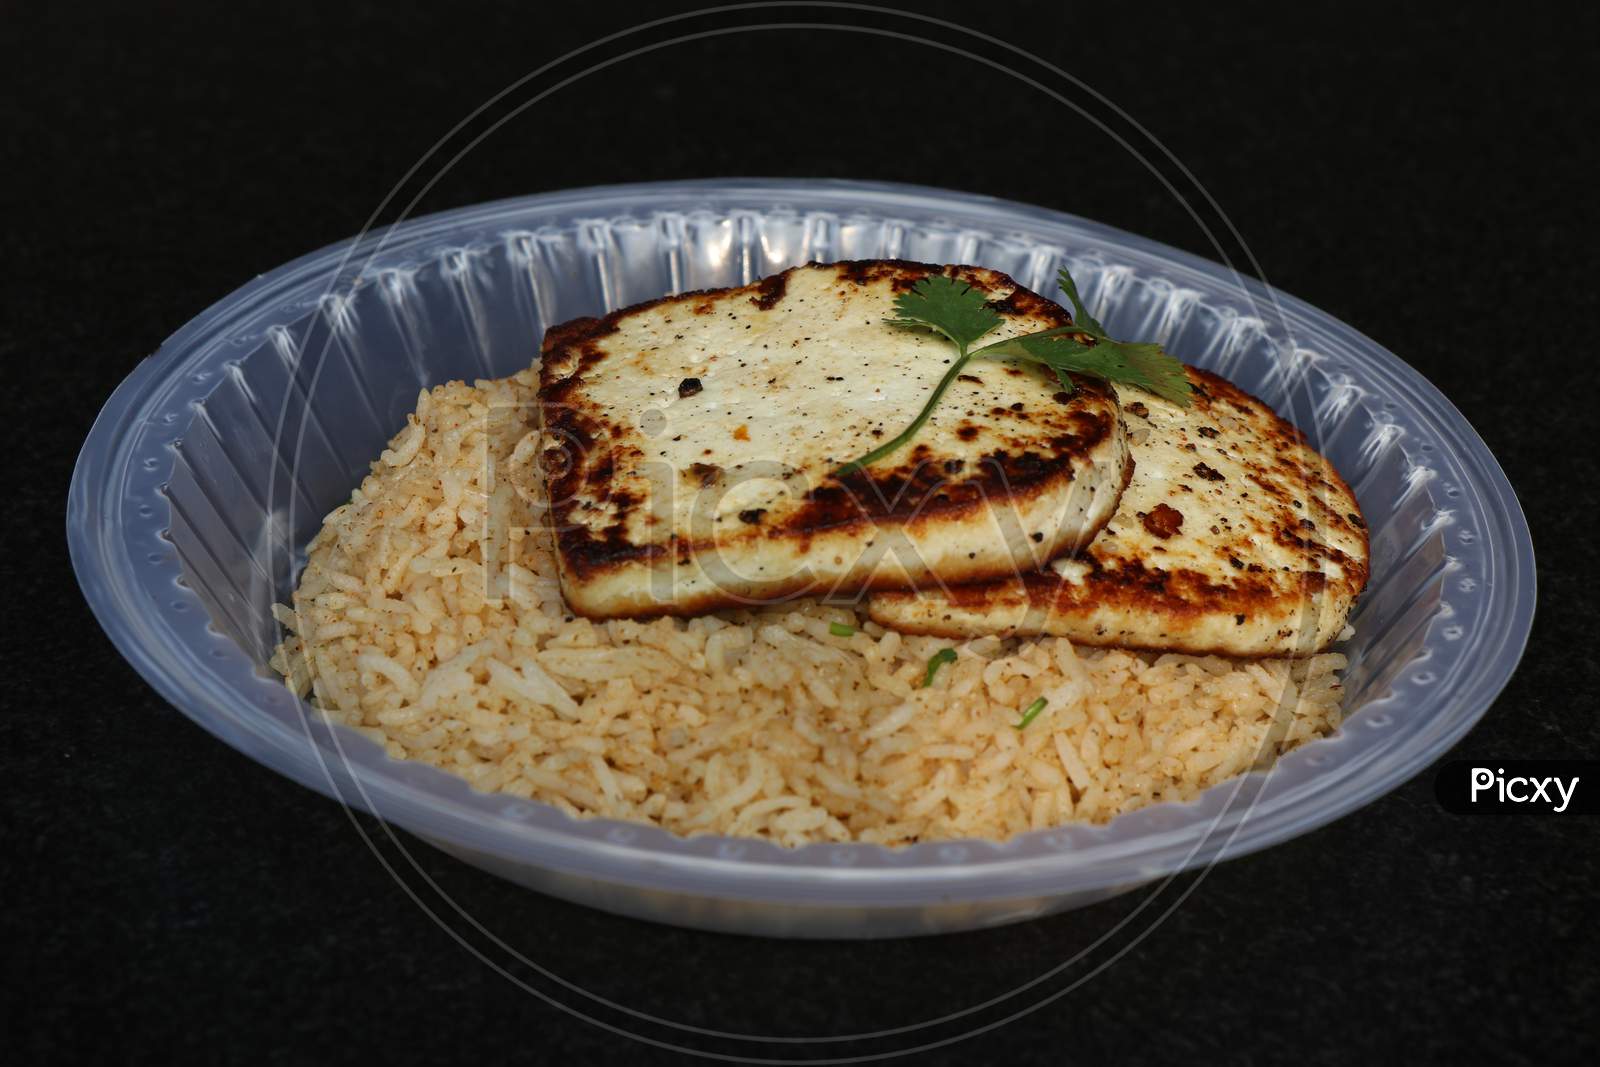 Fried Rice with Grilled Paneer (Cottage Cheese)